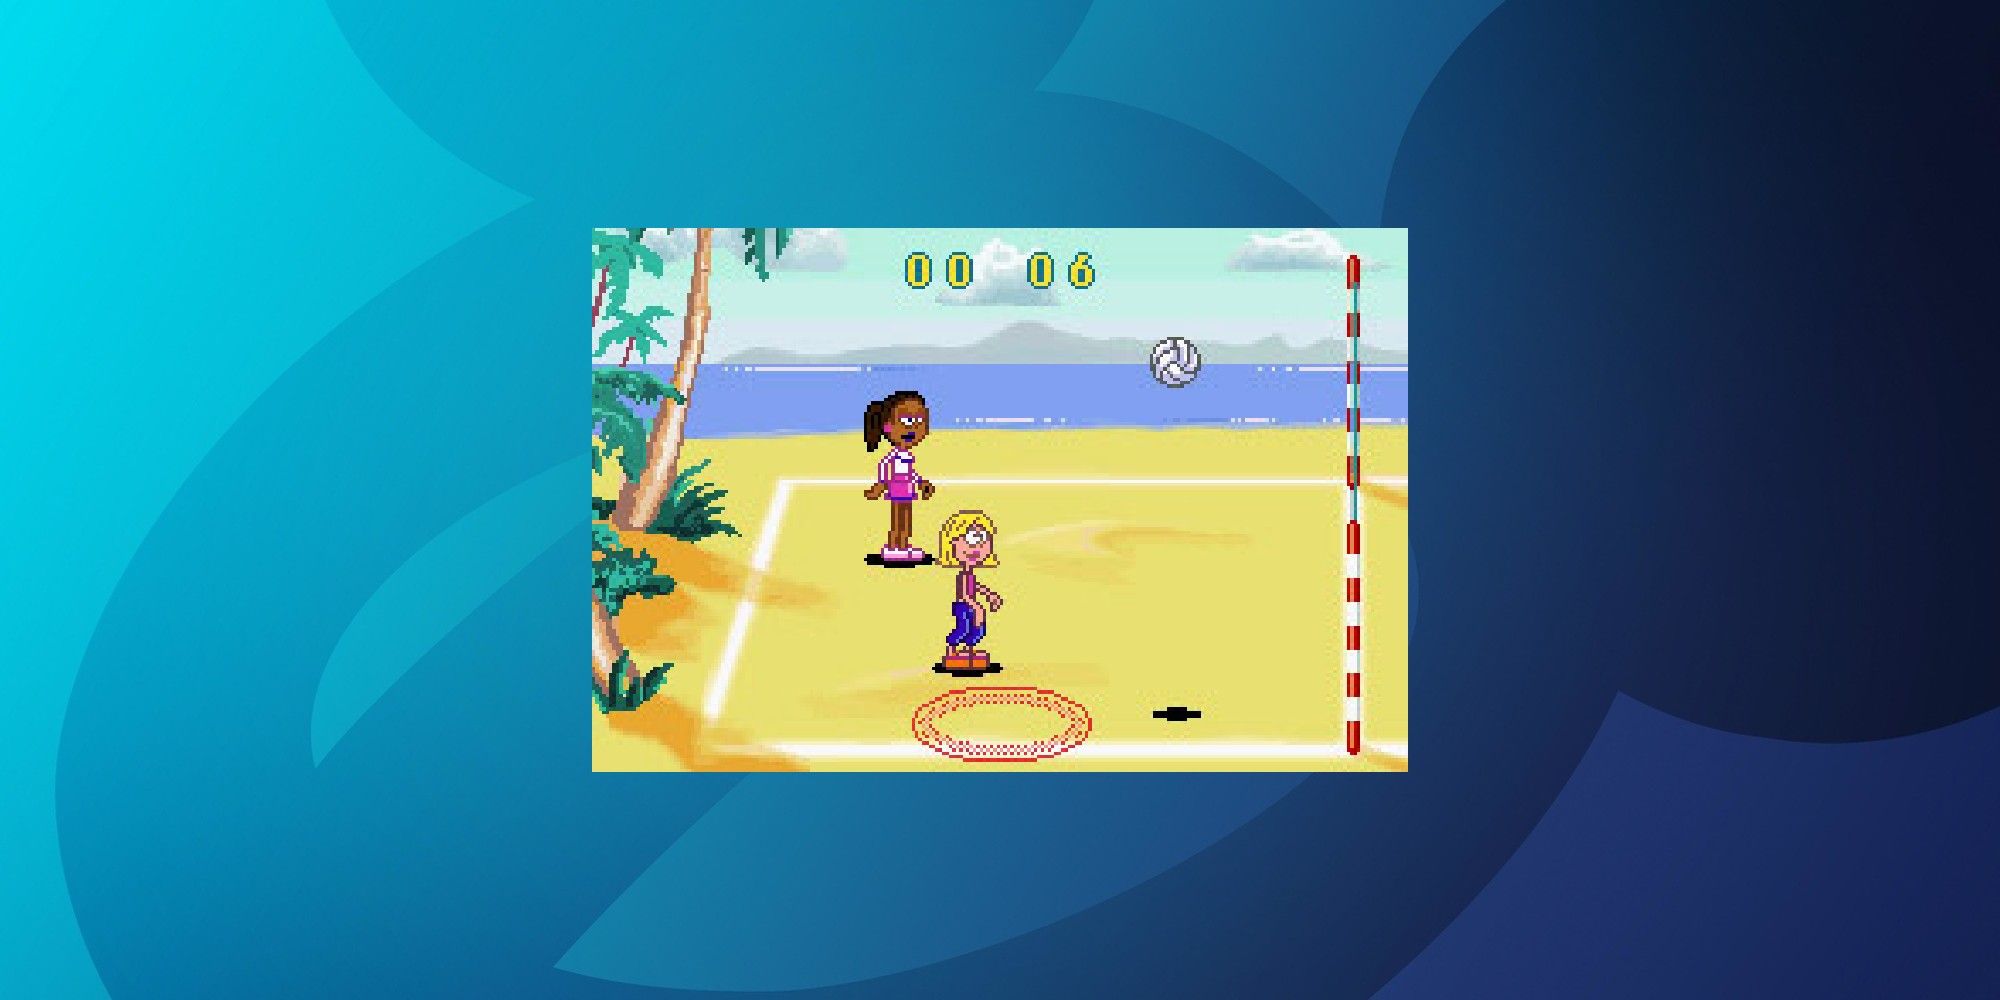 Lizzie's animated avatar is playing beach volleyball